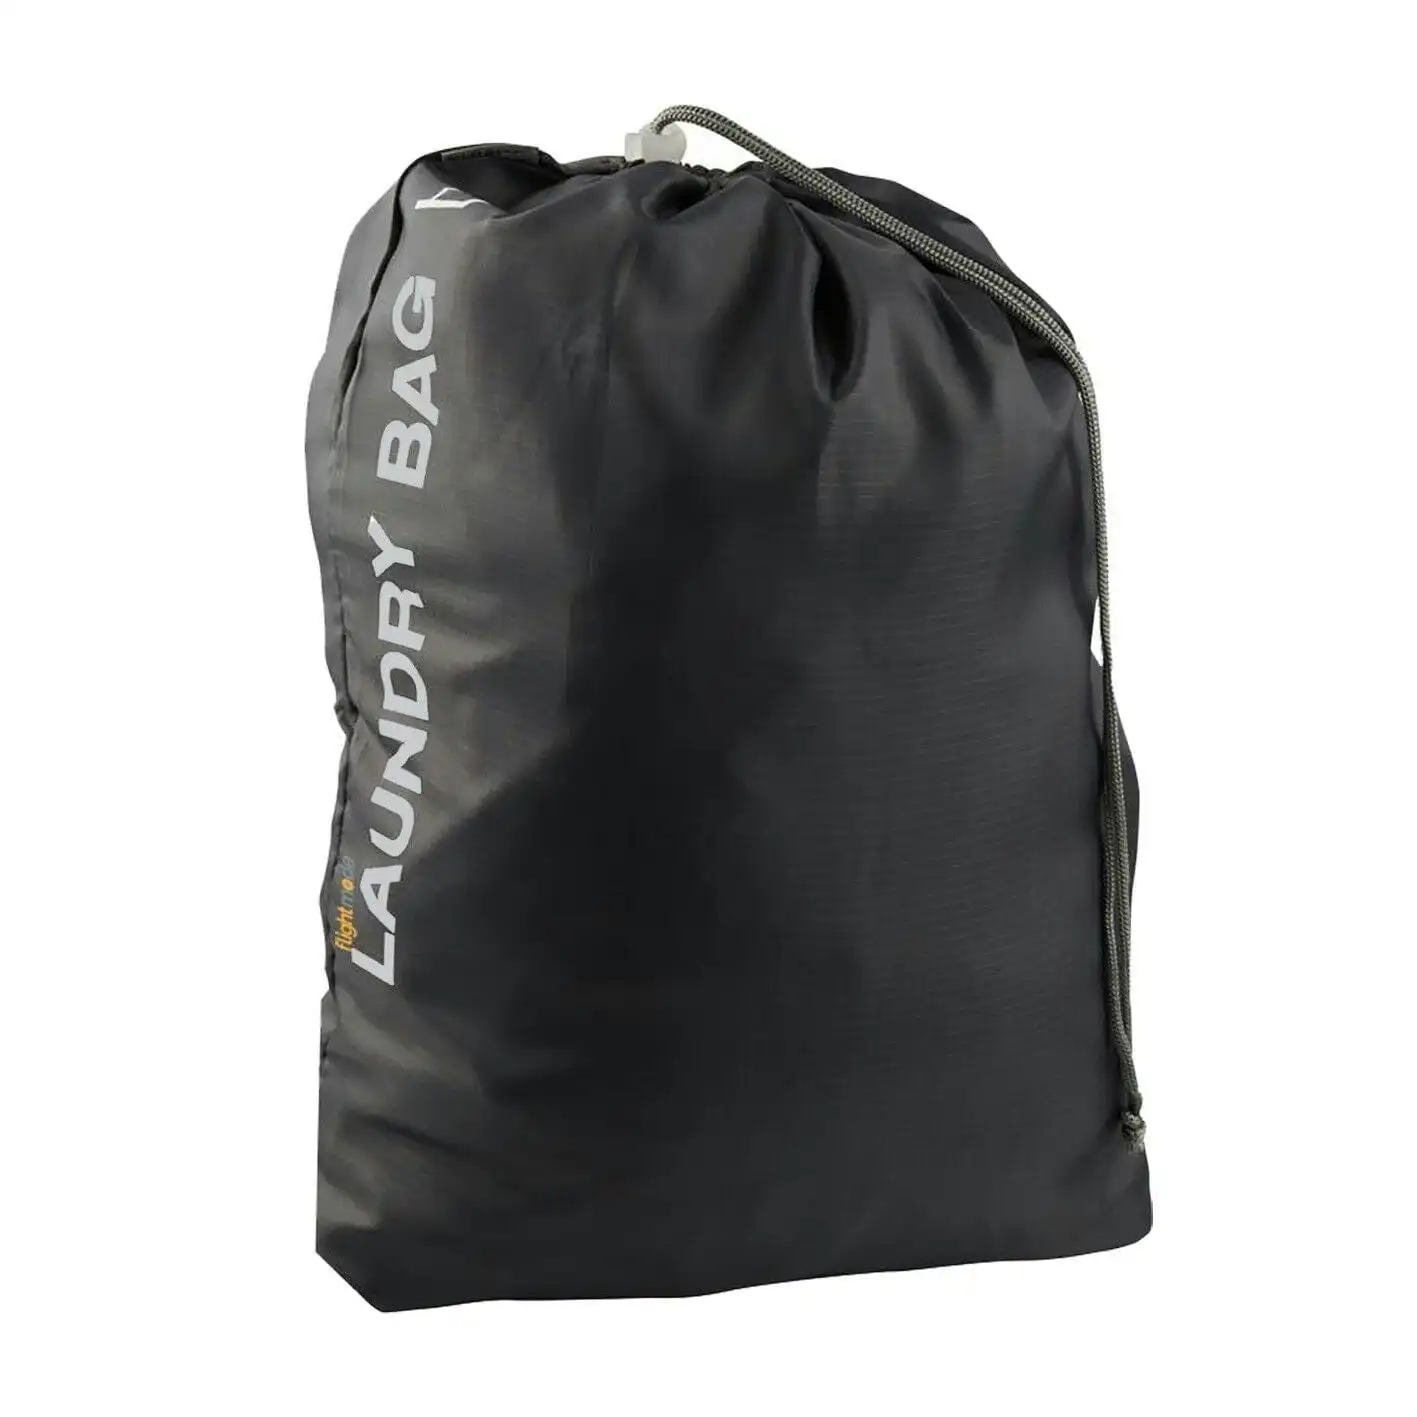 Drawstring Water Resistant Travel Laundry Bag Sports Gym Clothes Organiser